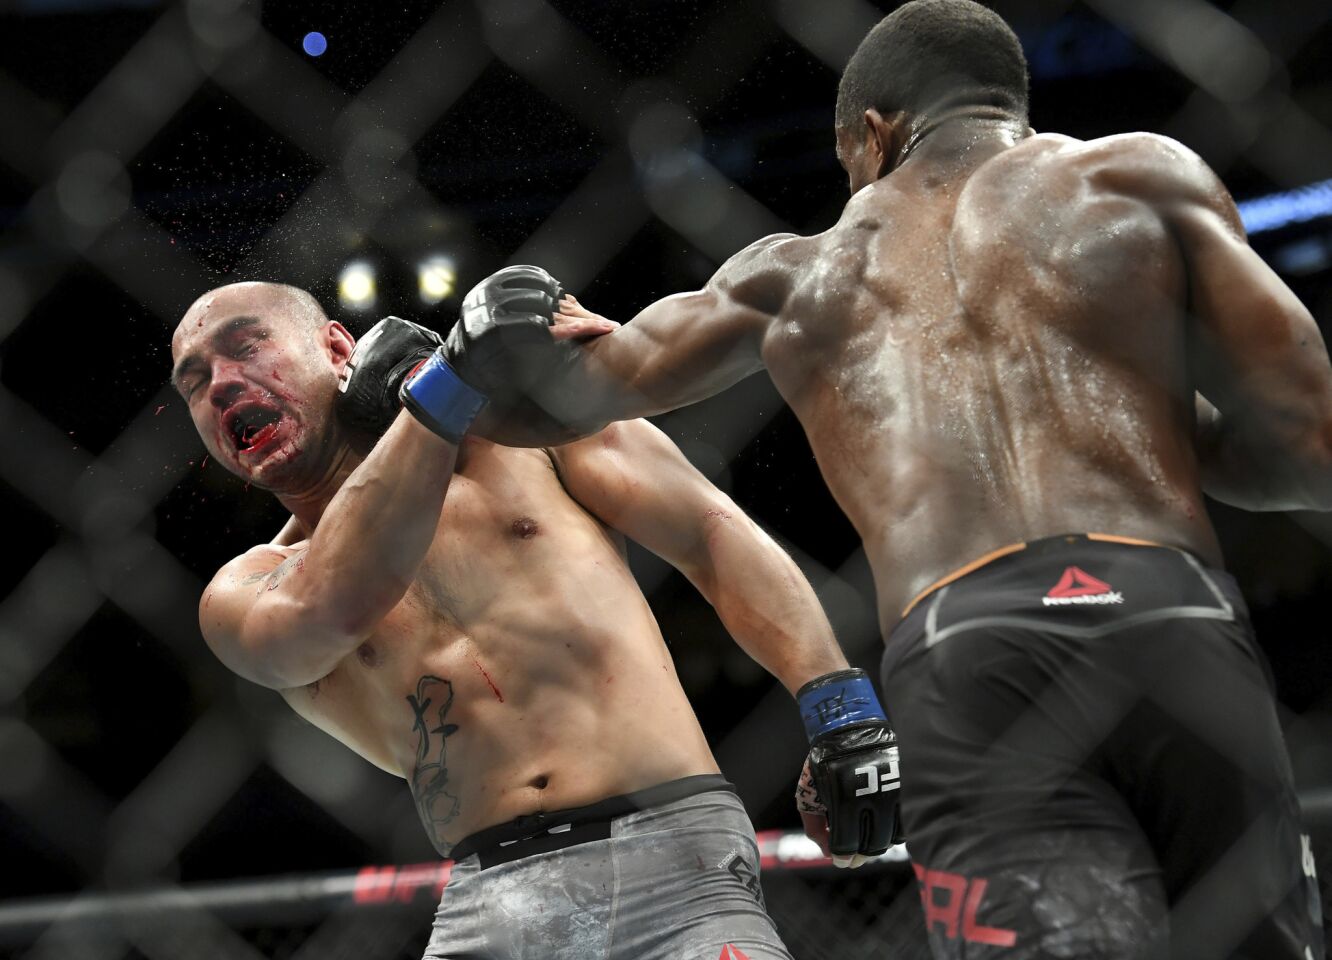 Frank Camacho, left, is hit by Geoff Neal during their welterweight mixed martial arts bout at UFC 228 on Saturday, Sept. 8, 2018, in Dallas. (AP Photo/Jeffrey McWhorter)